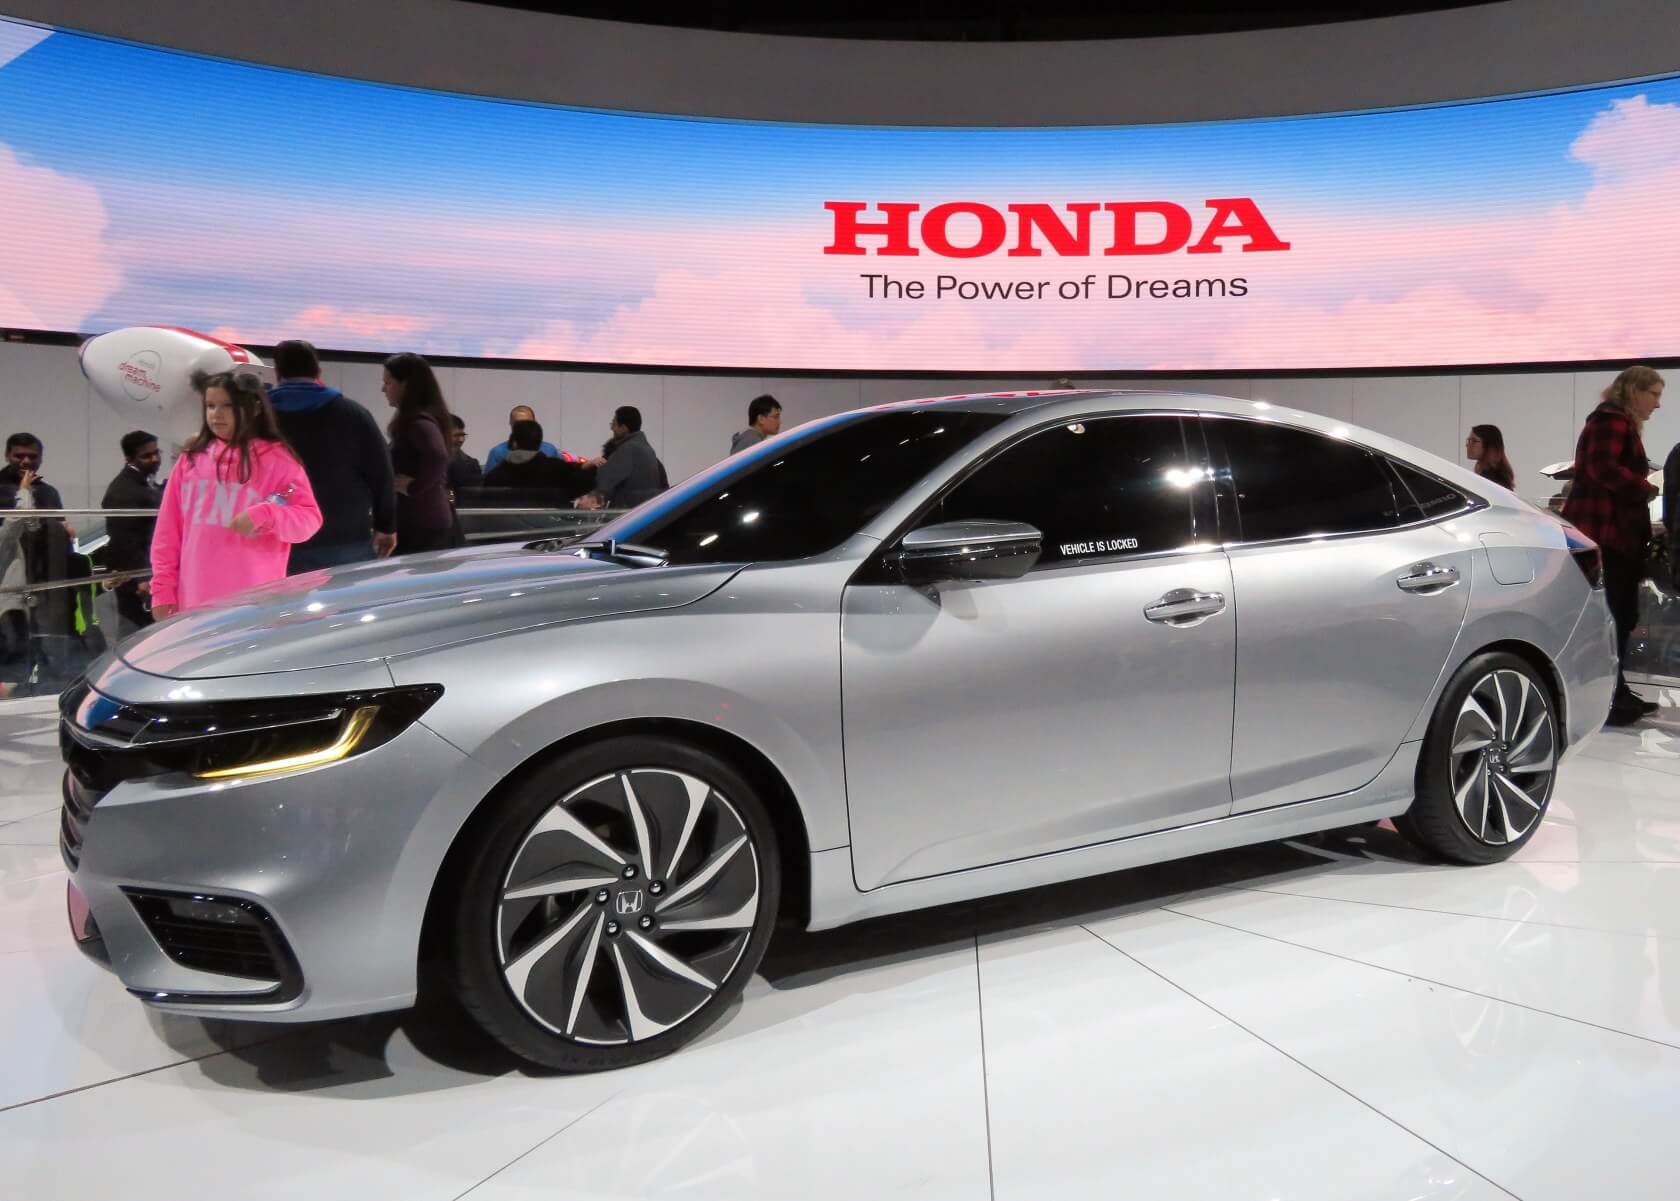 Honda plans to reveal its in-car virtual assistant at CES 2020